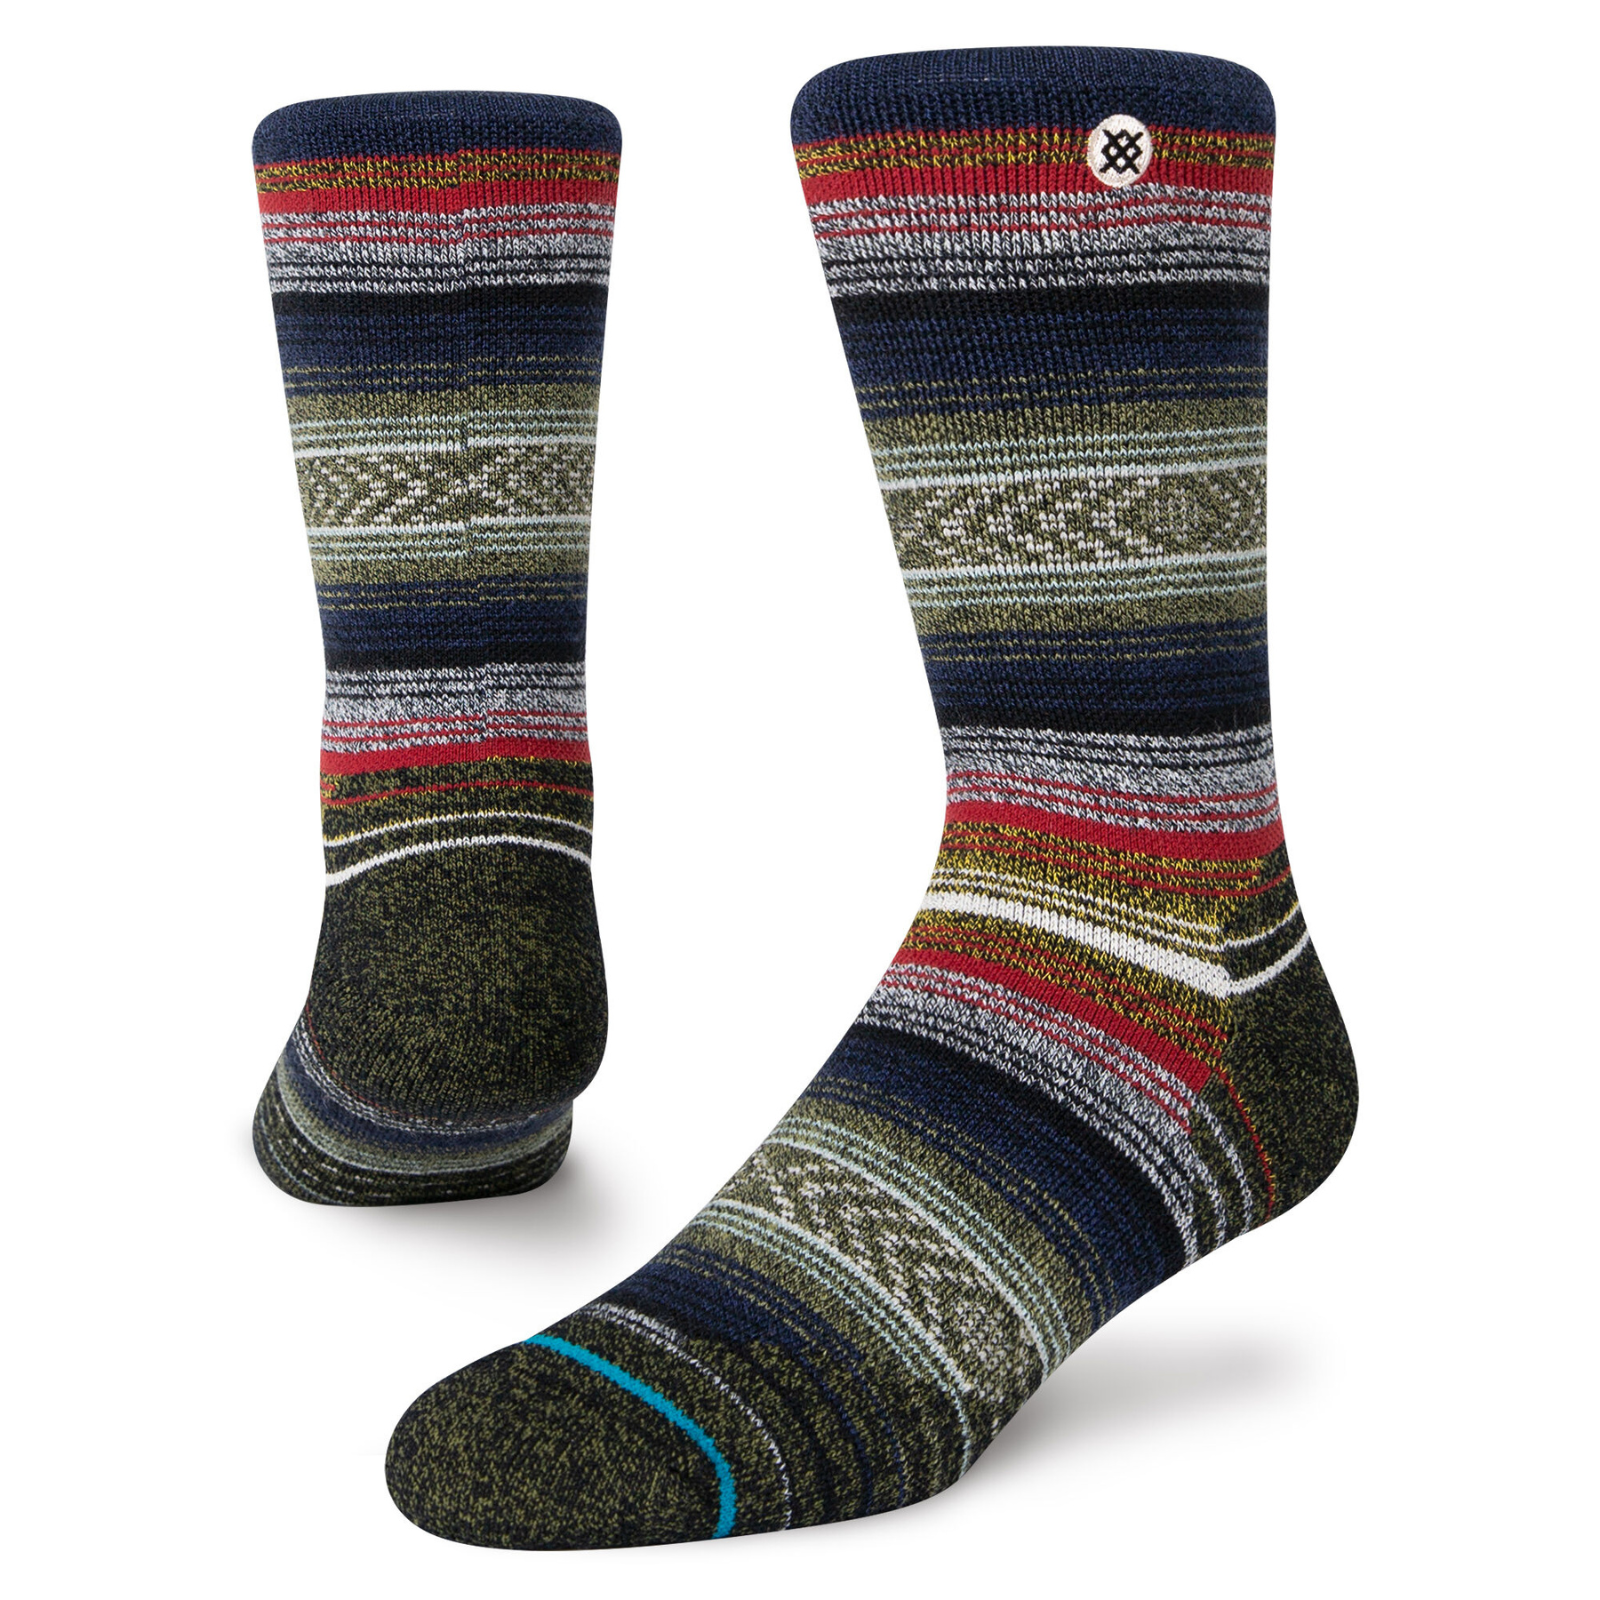 Stance Windy Peak Hike medium cushion men's sock featuring green, black, white and red stripes on display feet